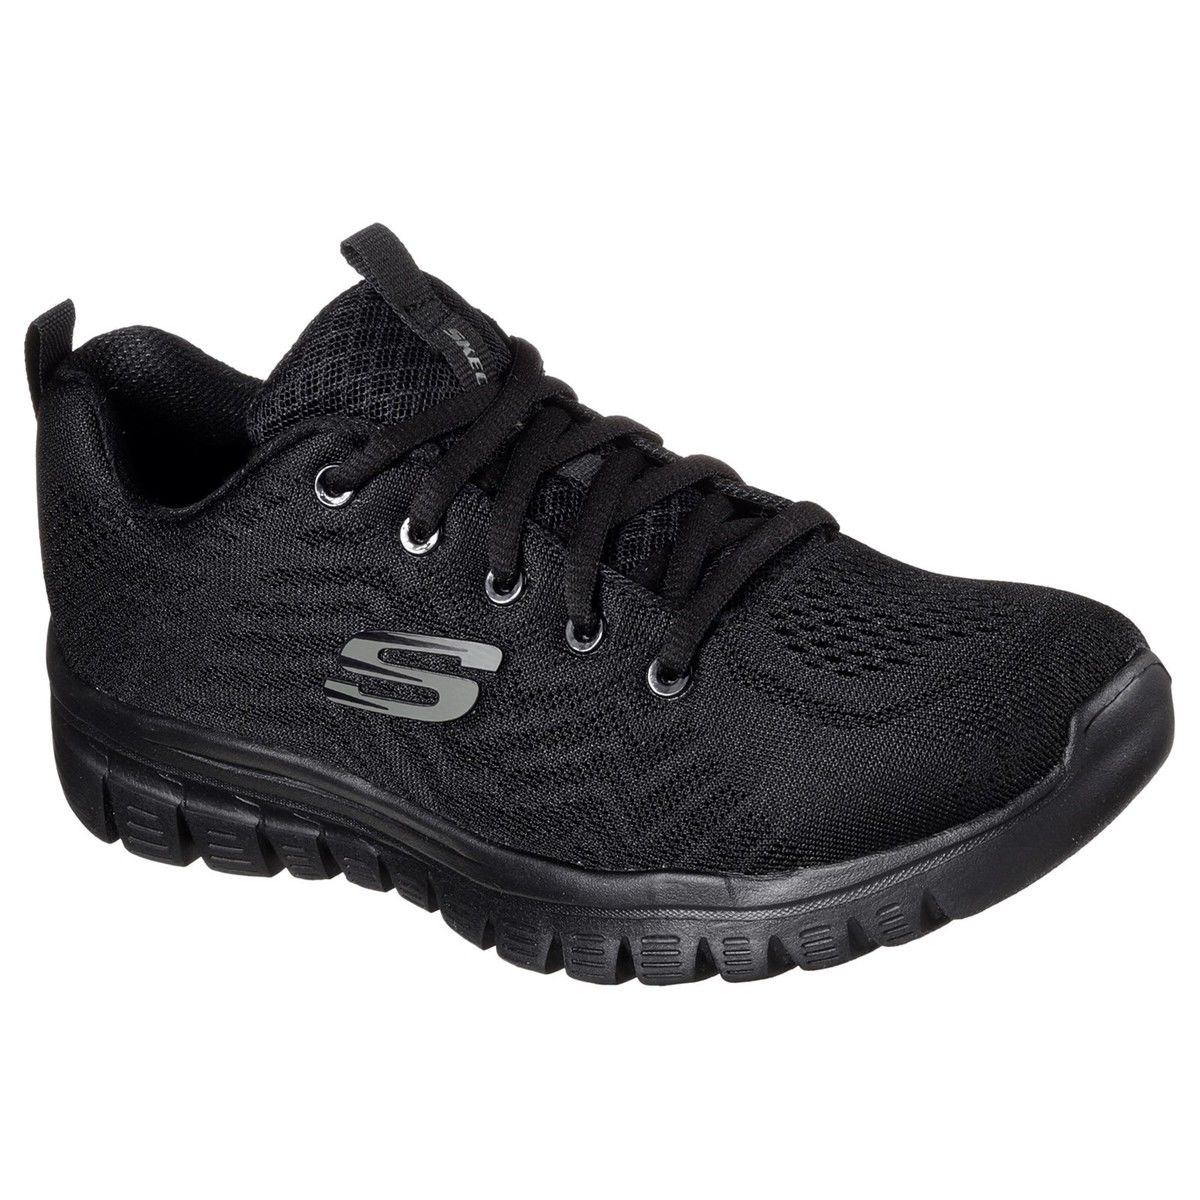 Skechers Graceful Get Connected BBK Black Womens trainers in a Plain Textile in Size 3